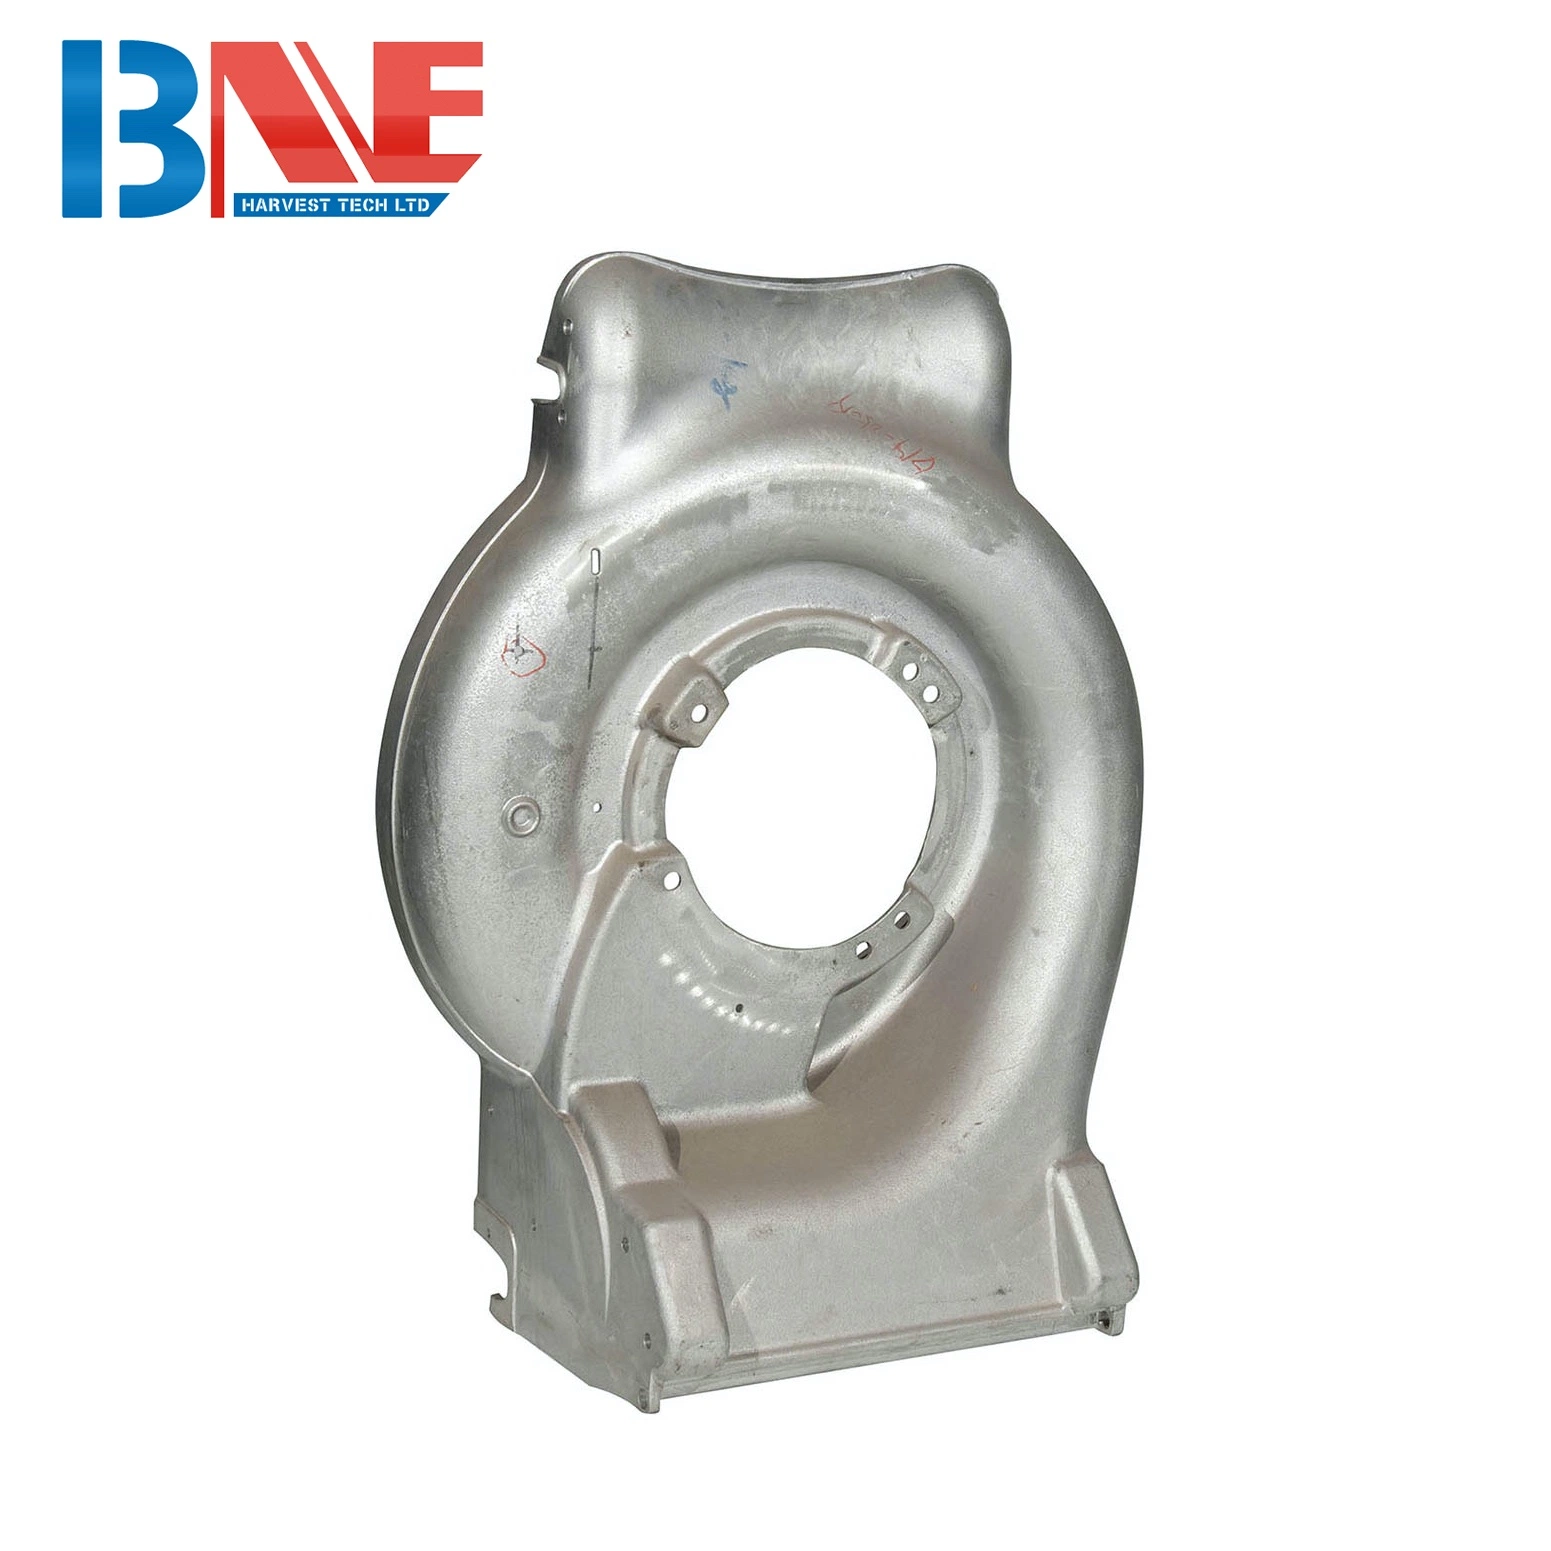 Custom Precision High Quality Aluminum Alloy Zinc Alloy Hardware Die Casting Products